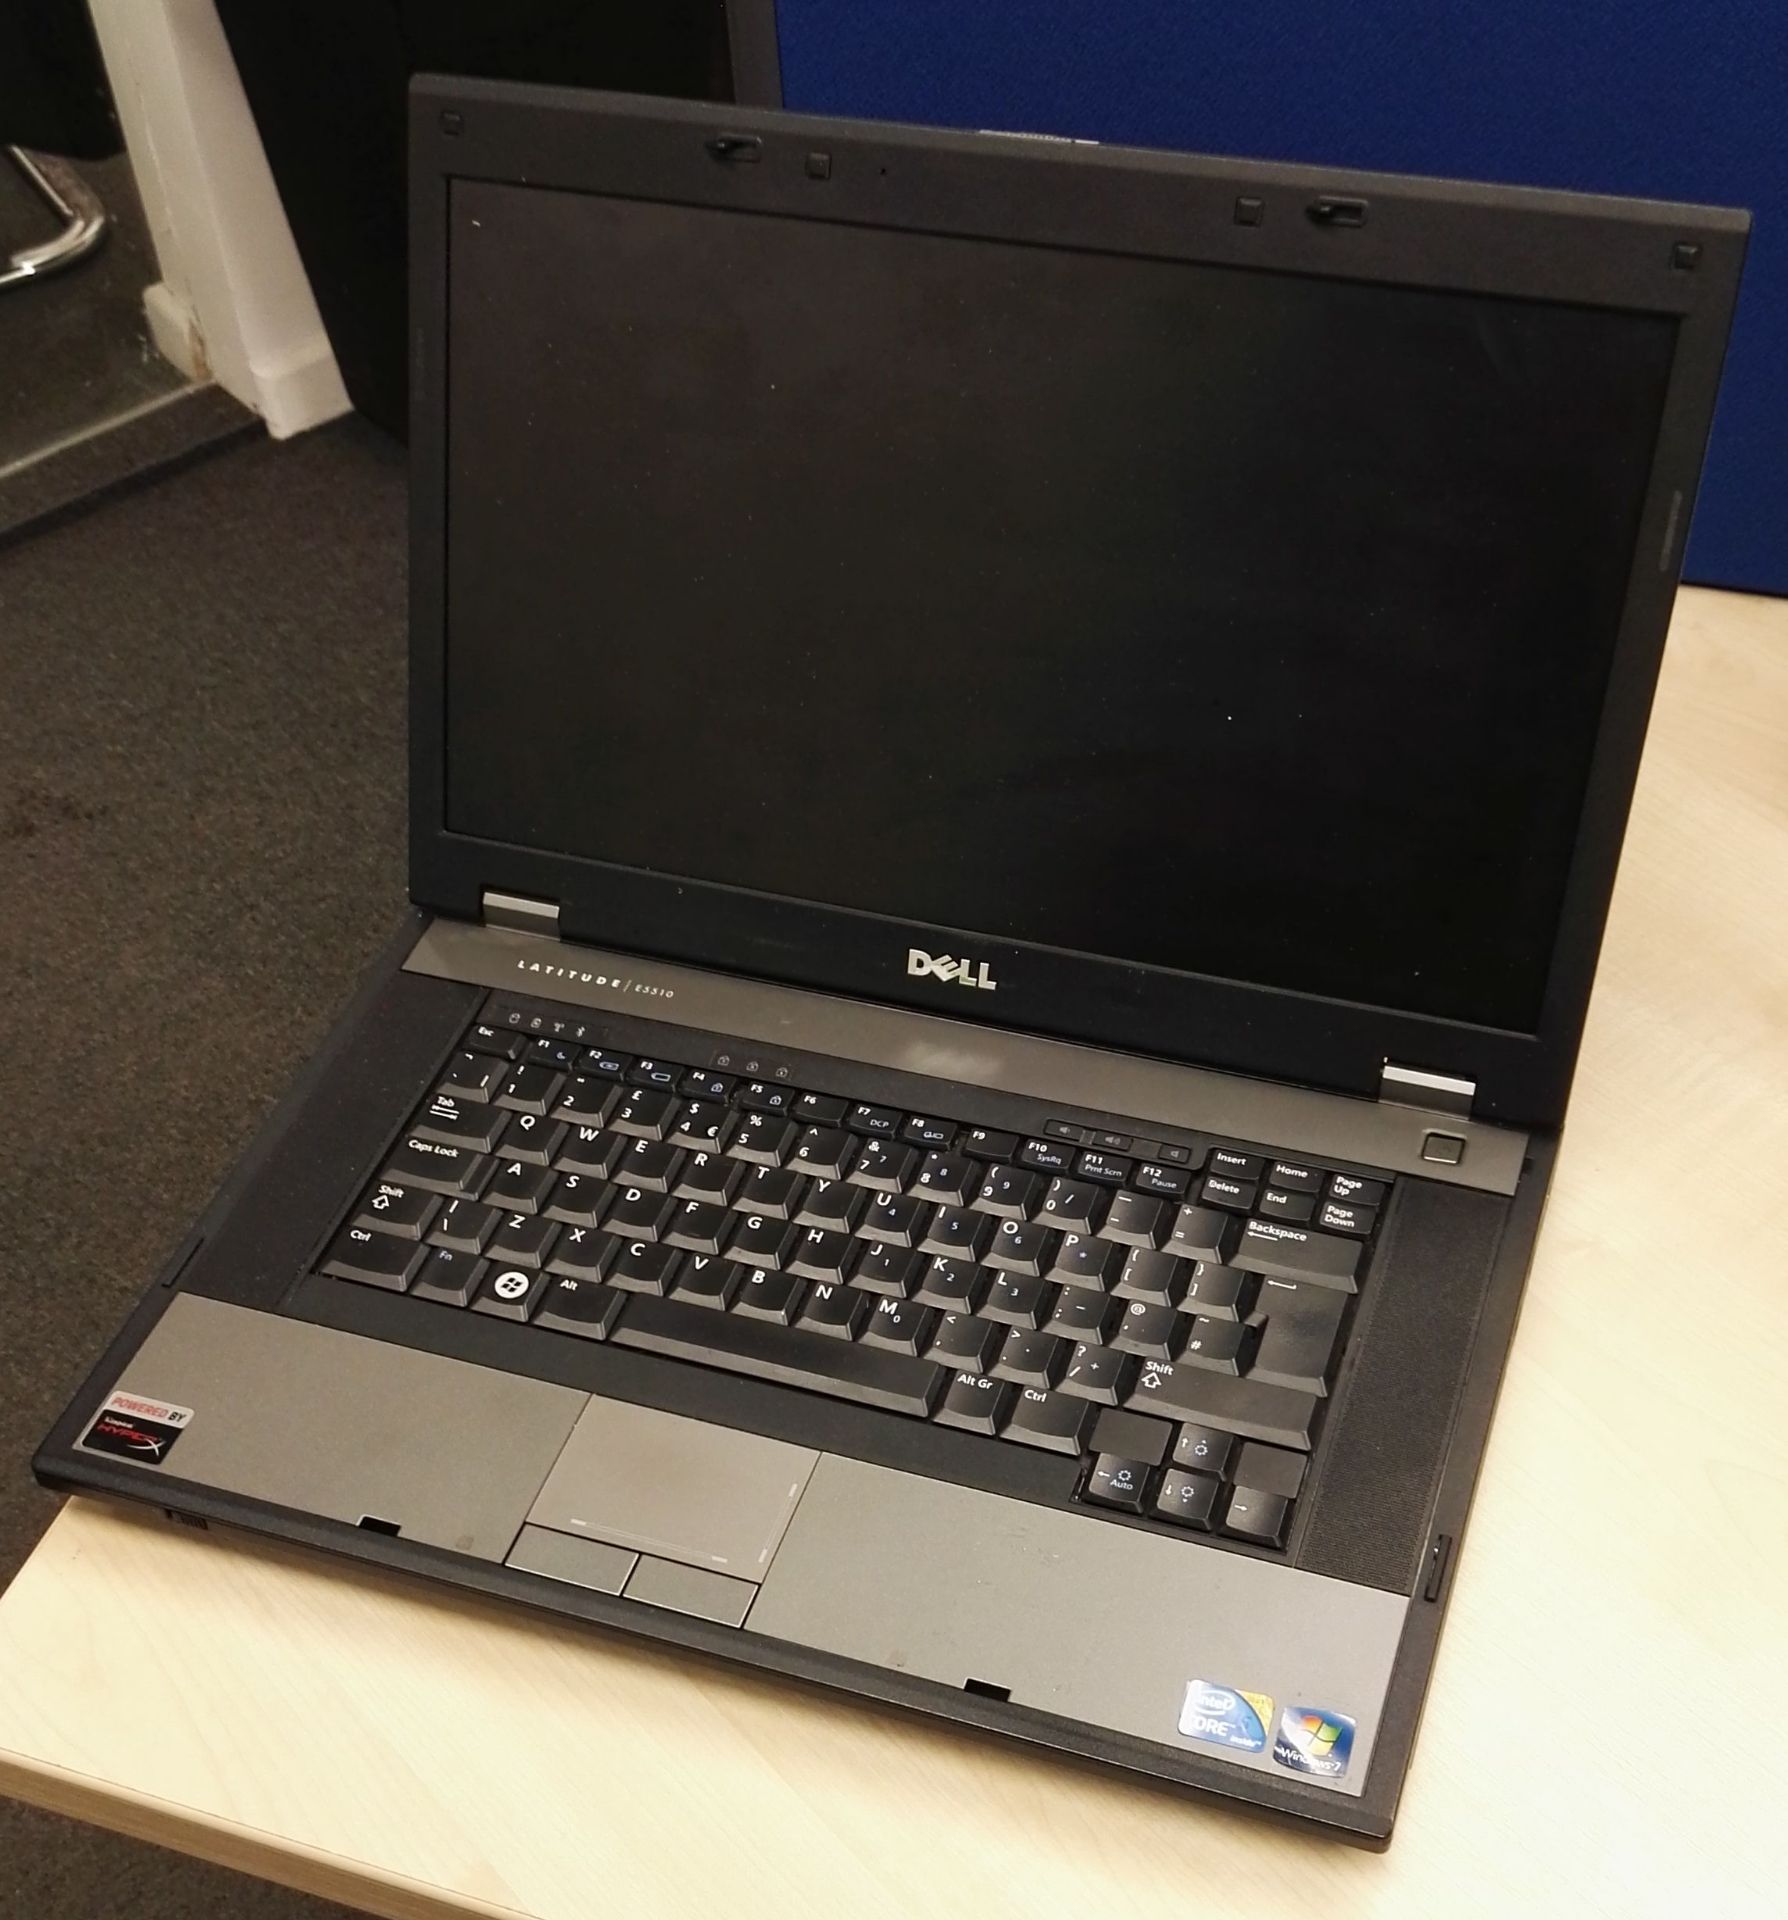 1 x Dell E5510 Latitude Laptop Computer - Features 6gb RAM, 320gb Hard Drive, Intel i5 2.4GHz - Image 6 of 16